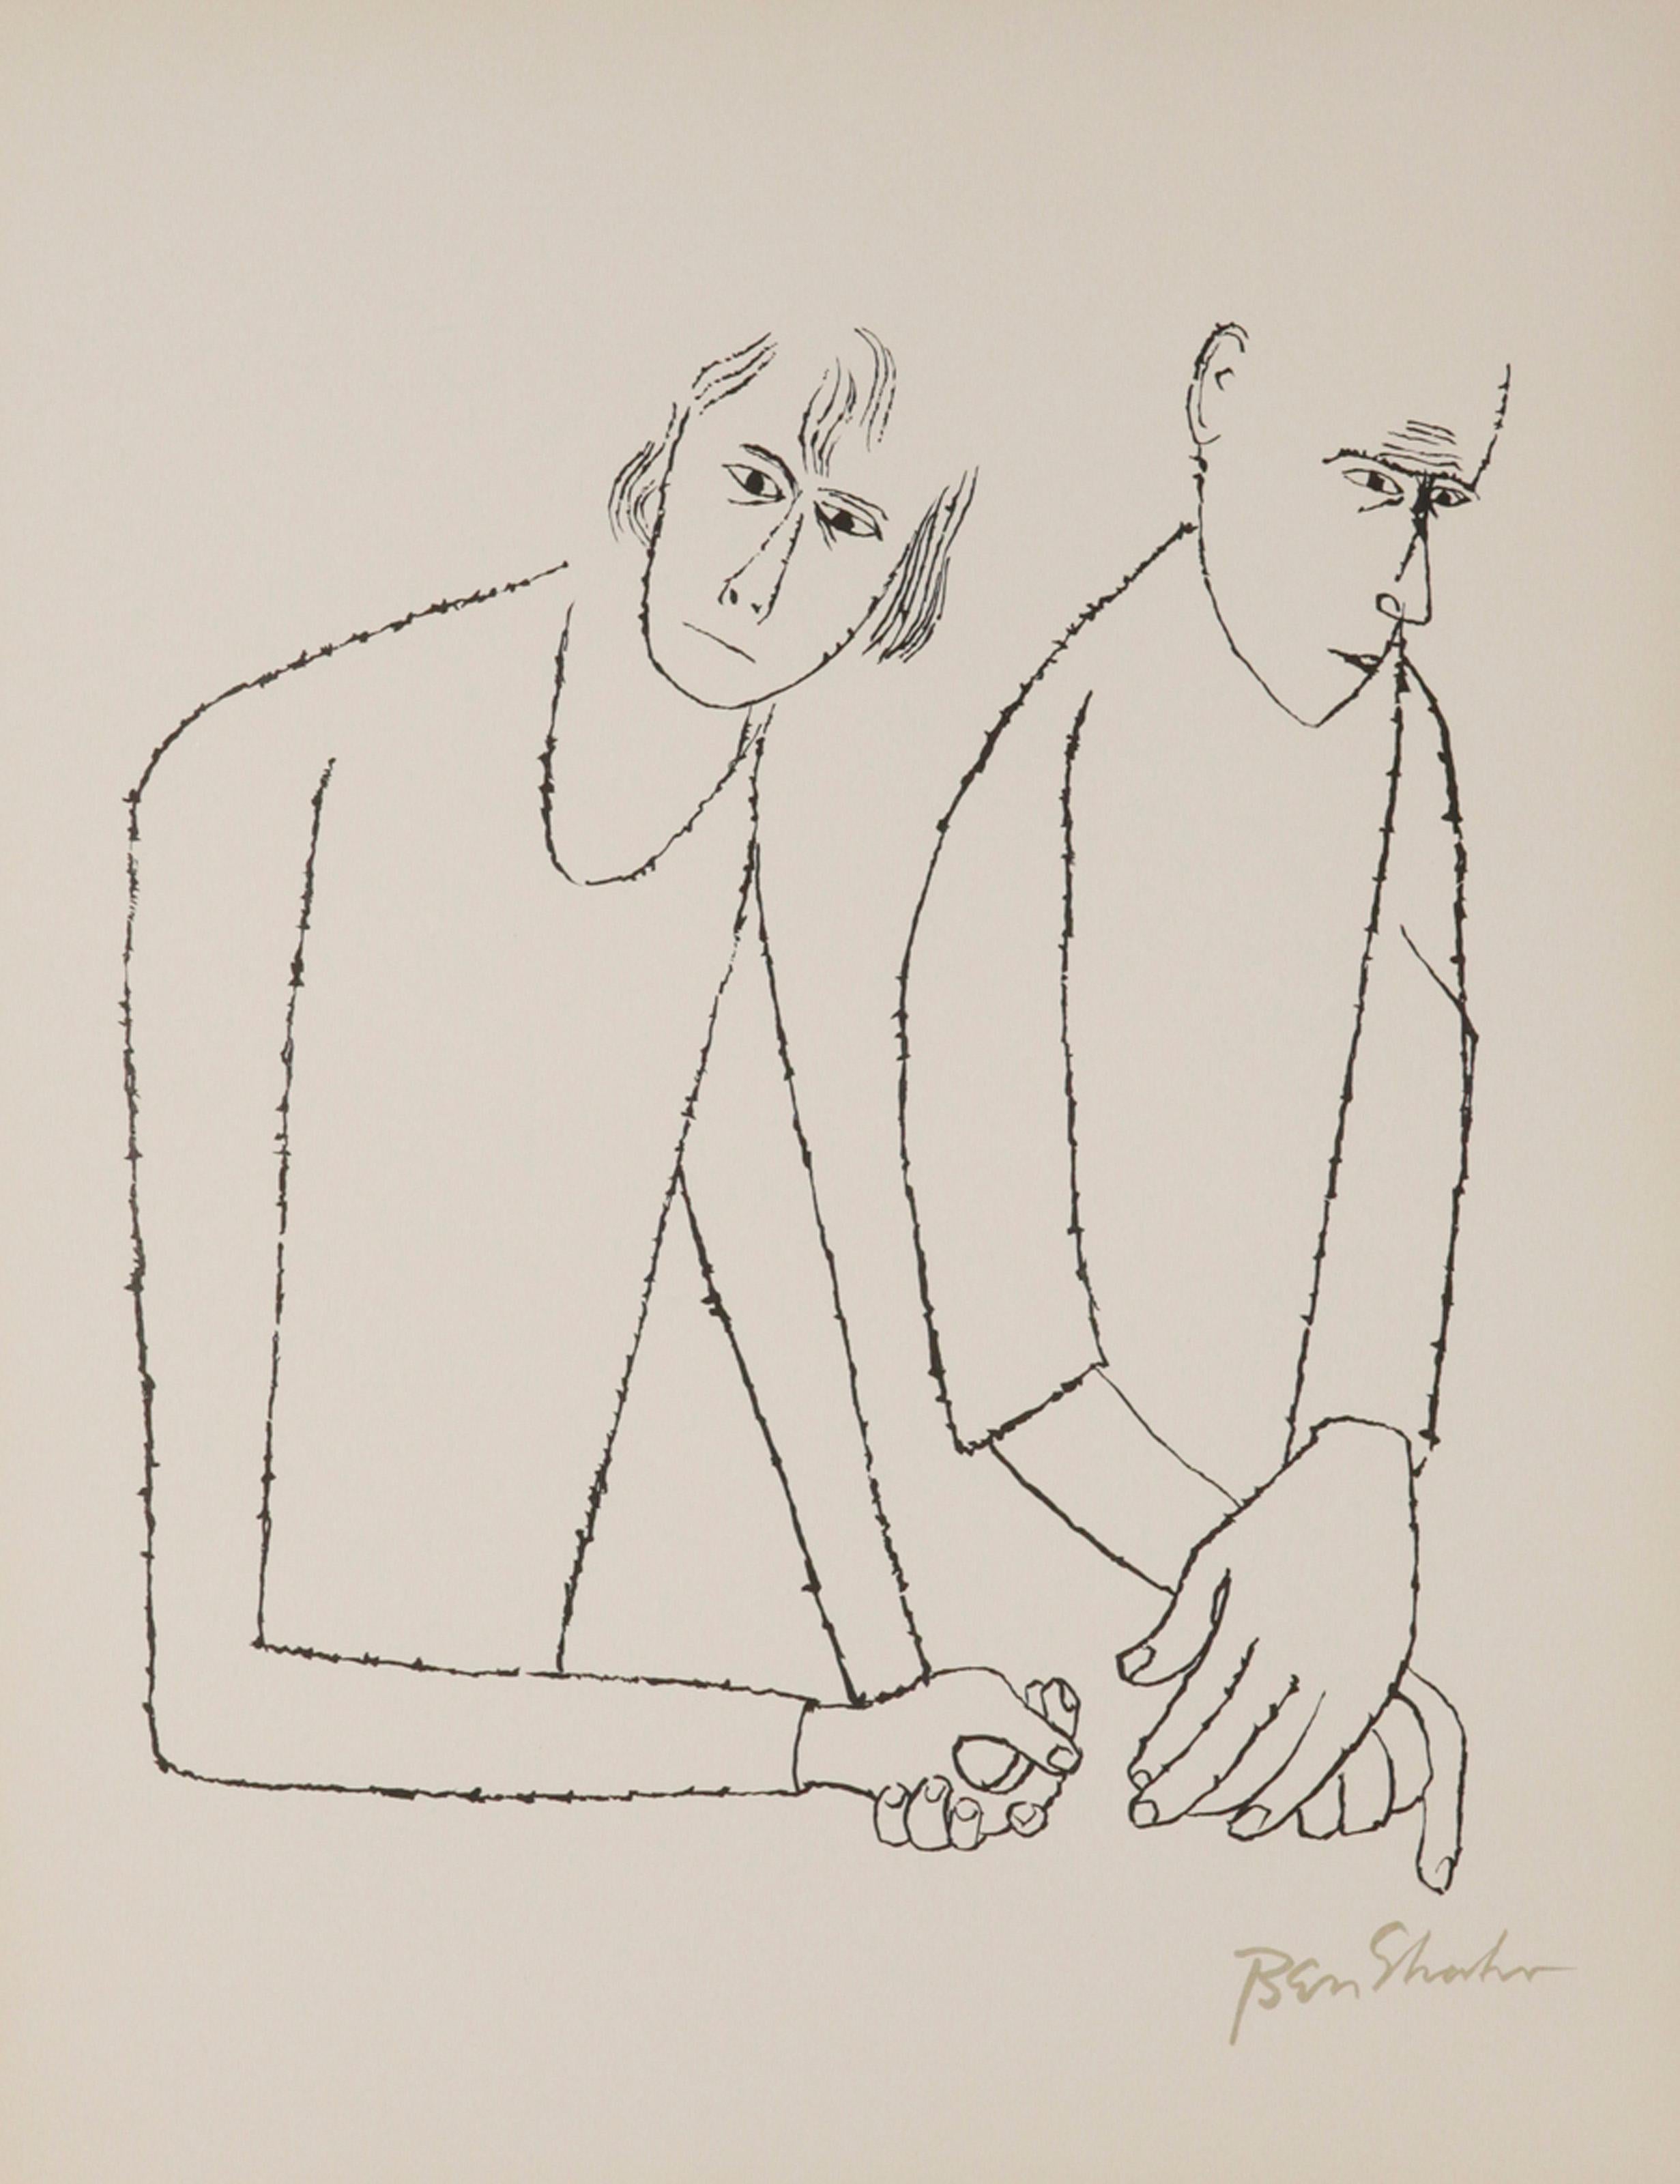 Artist: Ben Shahn, American (1898 - 1969)
Title: To Parents One Had to Hurt from the Rilke Portfolio
Year: 1968
Medium: Lithograph on Arches, signed in the plate
Edition: 750
Size: 22.5 x 17.75 in. (57.15 x 45.09 cm)

Printer: Atelier Mourlot Ltd.,